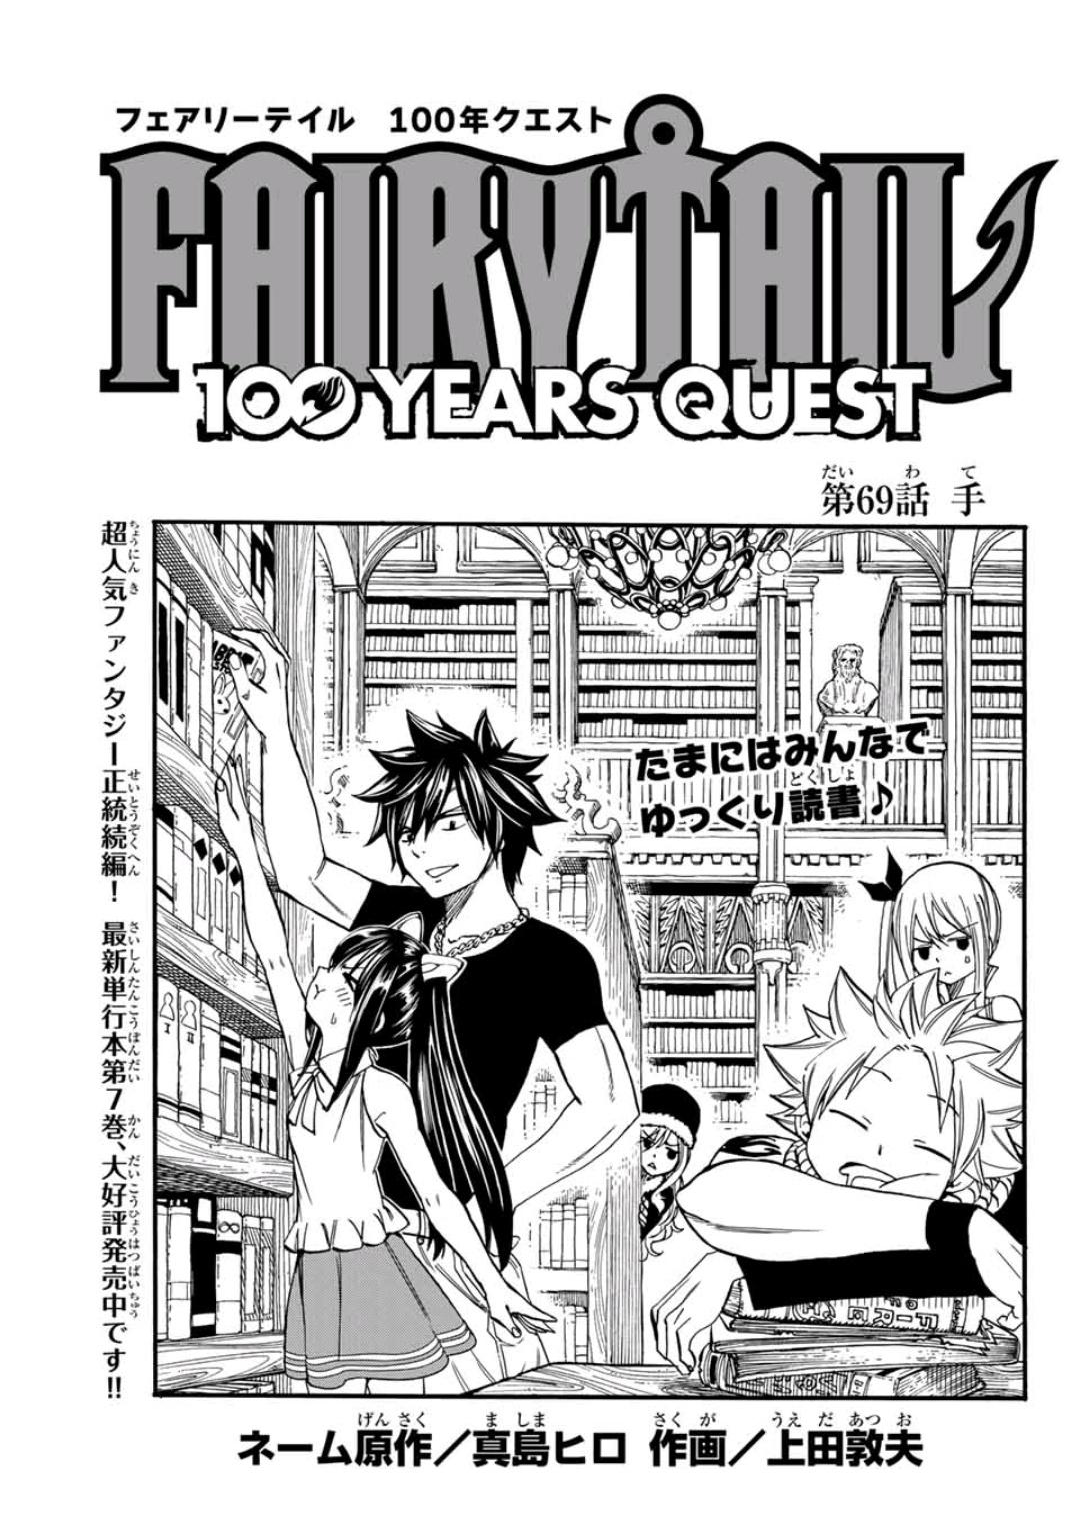 Fairy Tail: 100 Years Quest Chapter 69 | Fairy Tail Wiki | Fandom